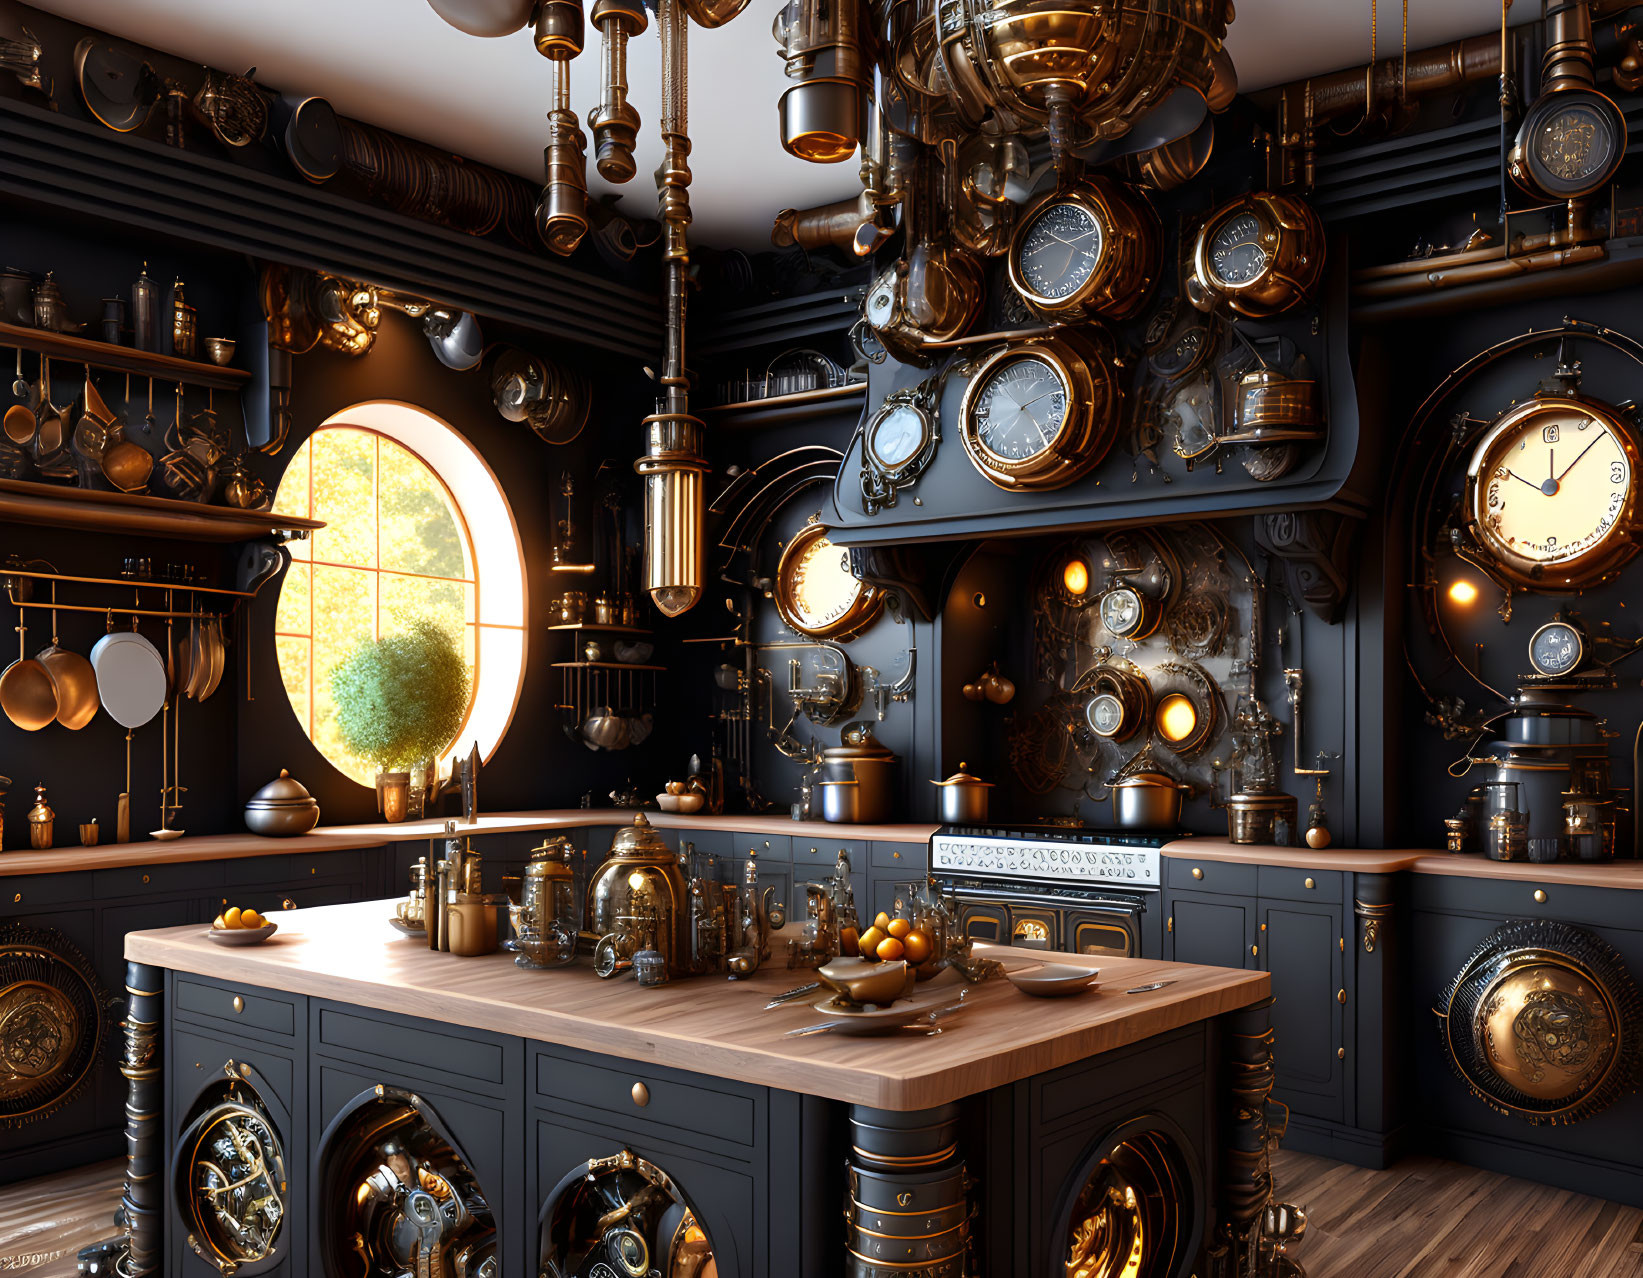 Detailed Steampunk-Style Kitchen with Brass Gadgets and Vintage Clocks